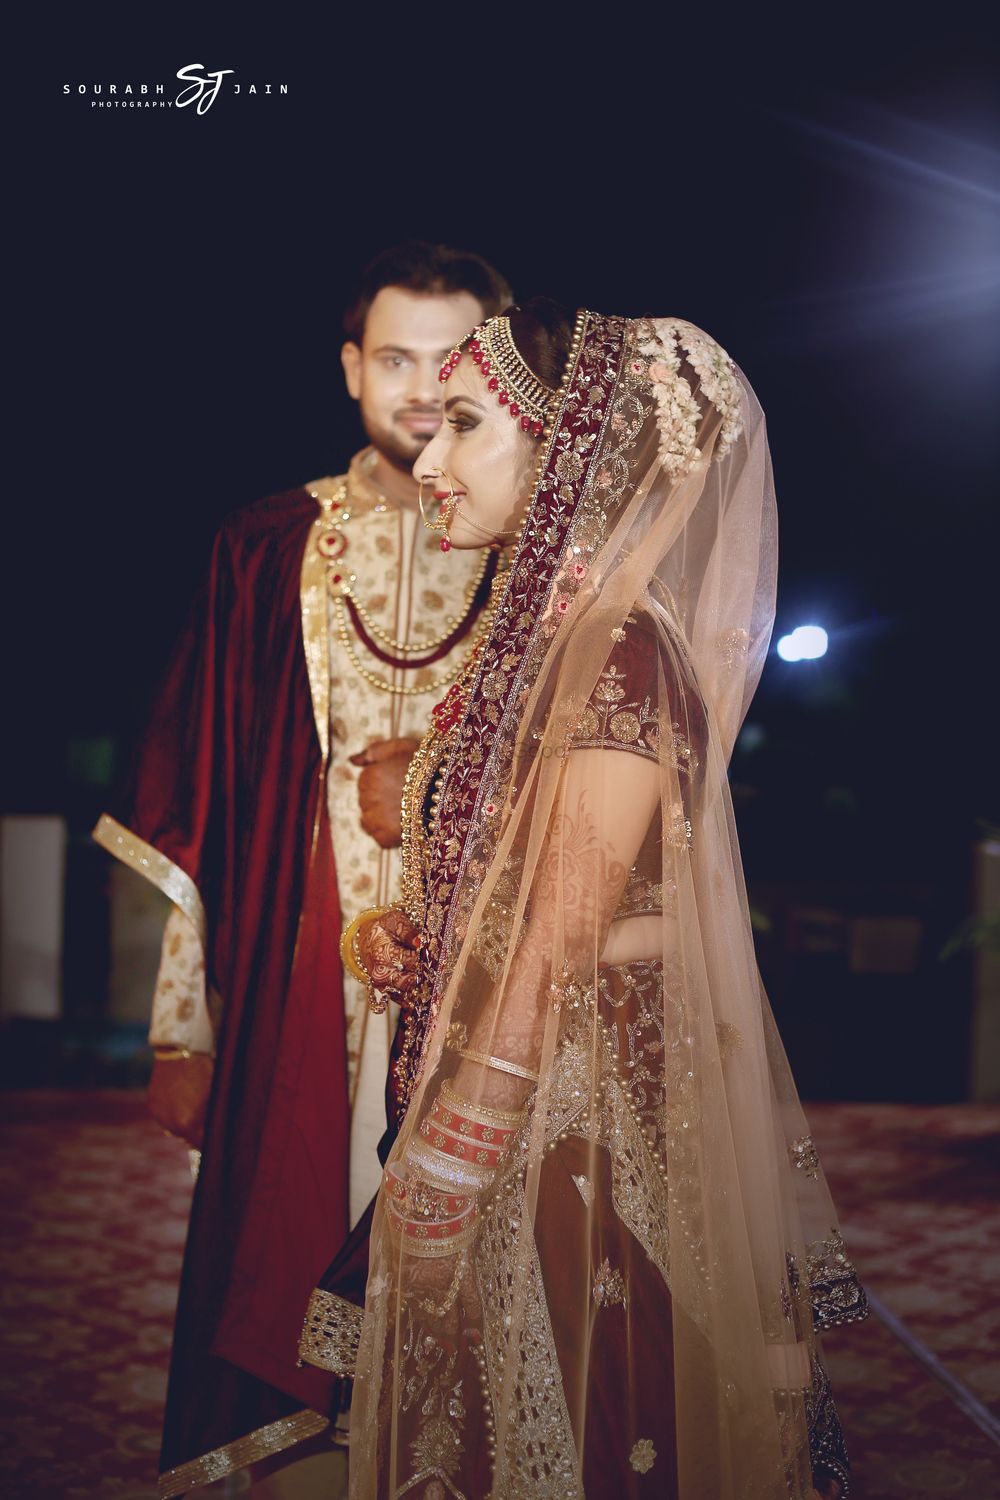 Photo From wedding Bride - By Sourabh Jain Photography